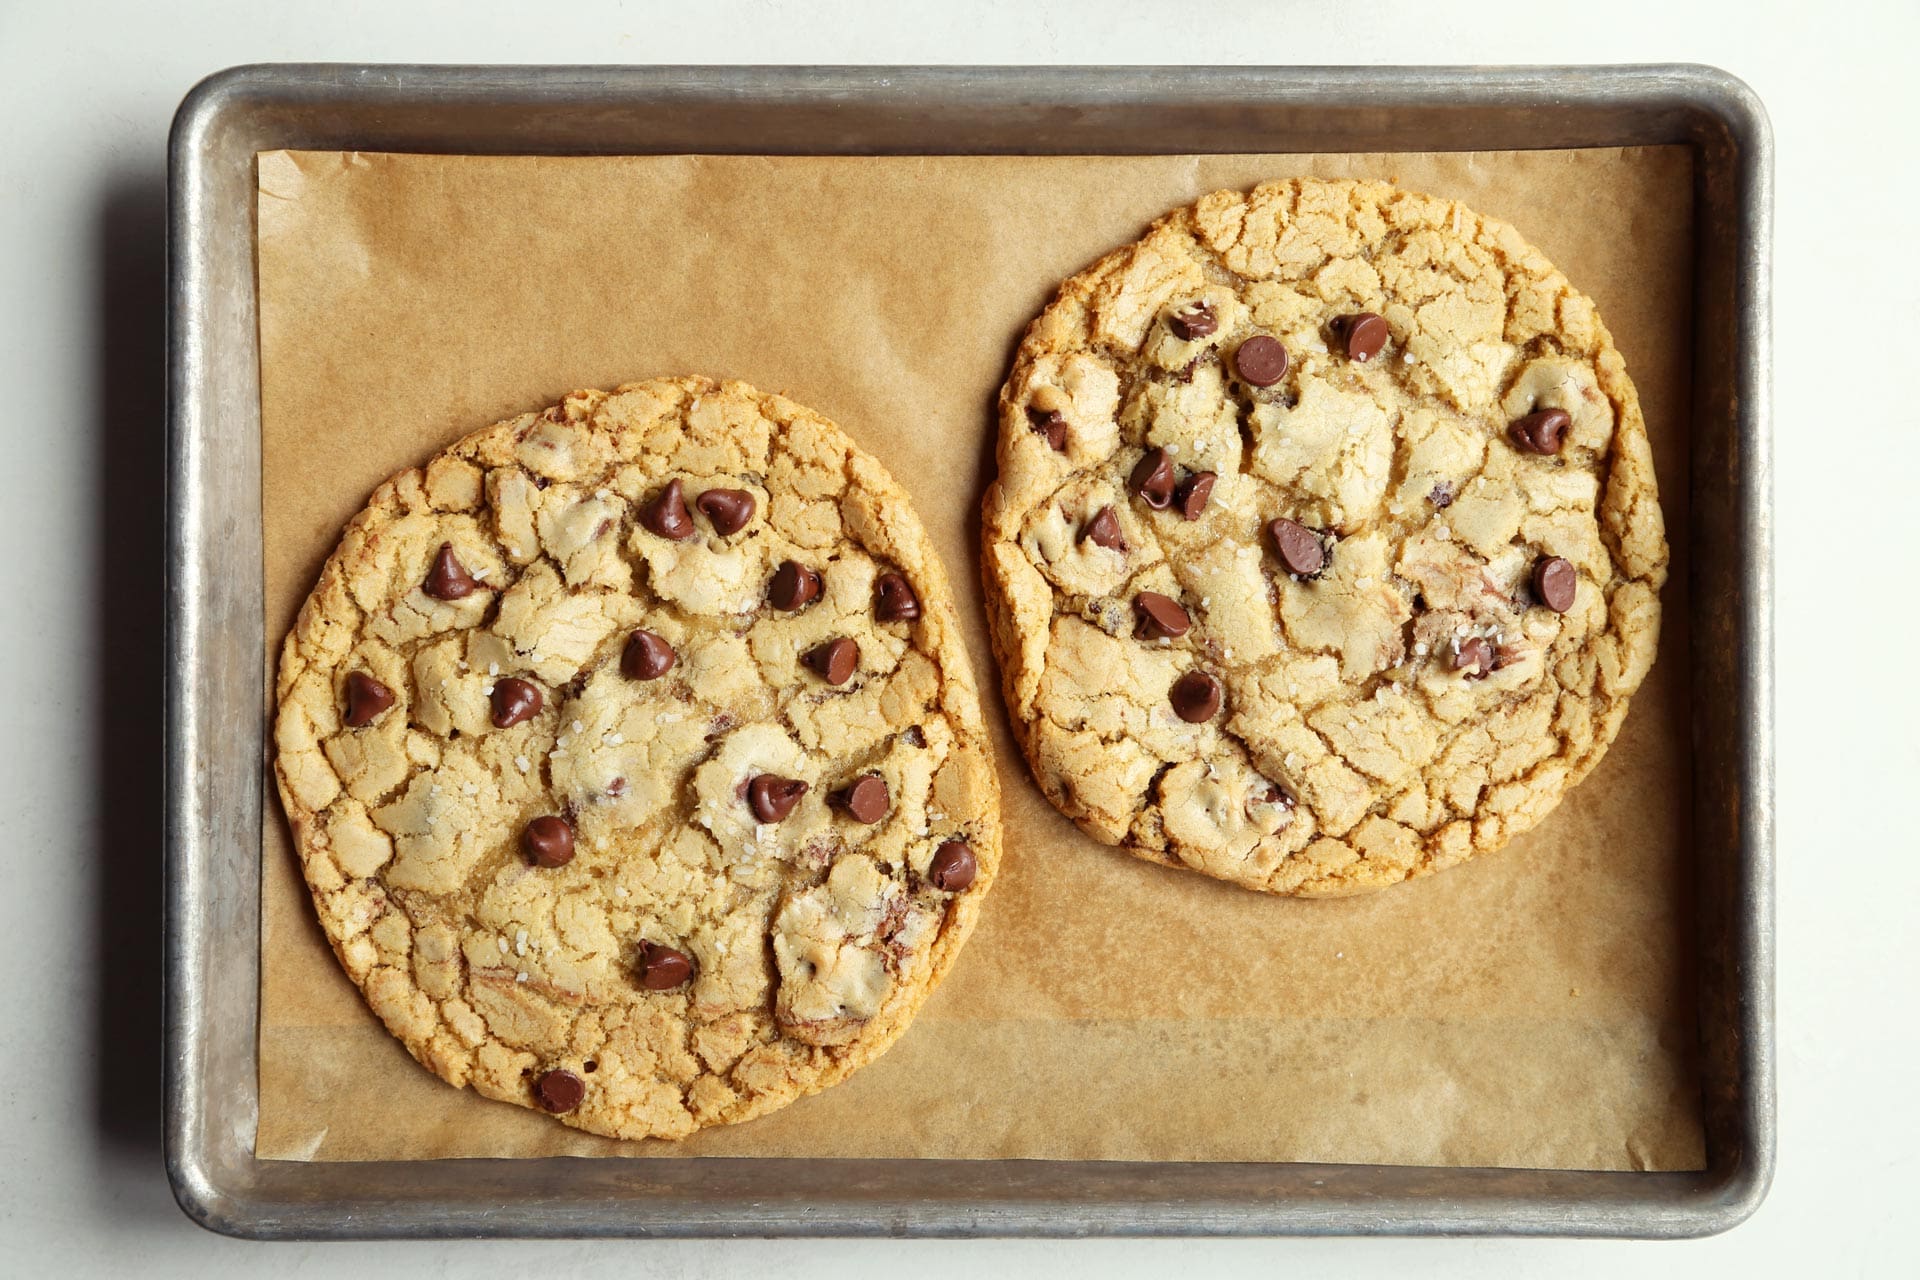 A Recipe For Just Two Giant Chocolate Chip Cookies